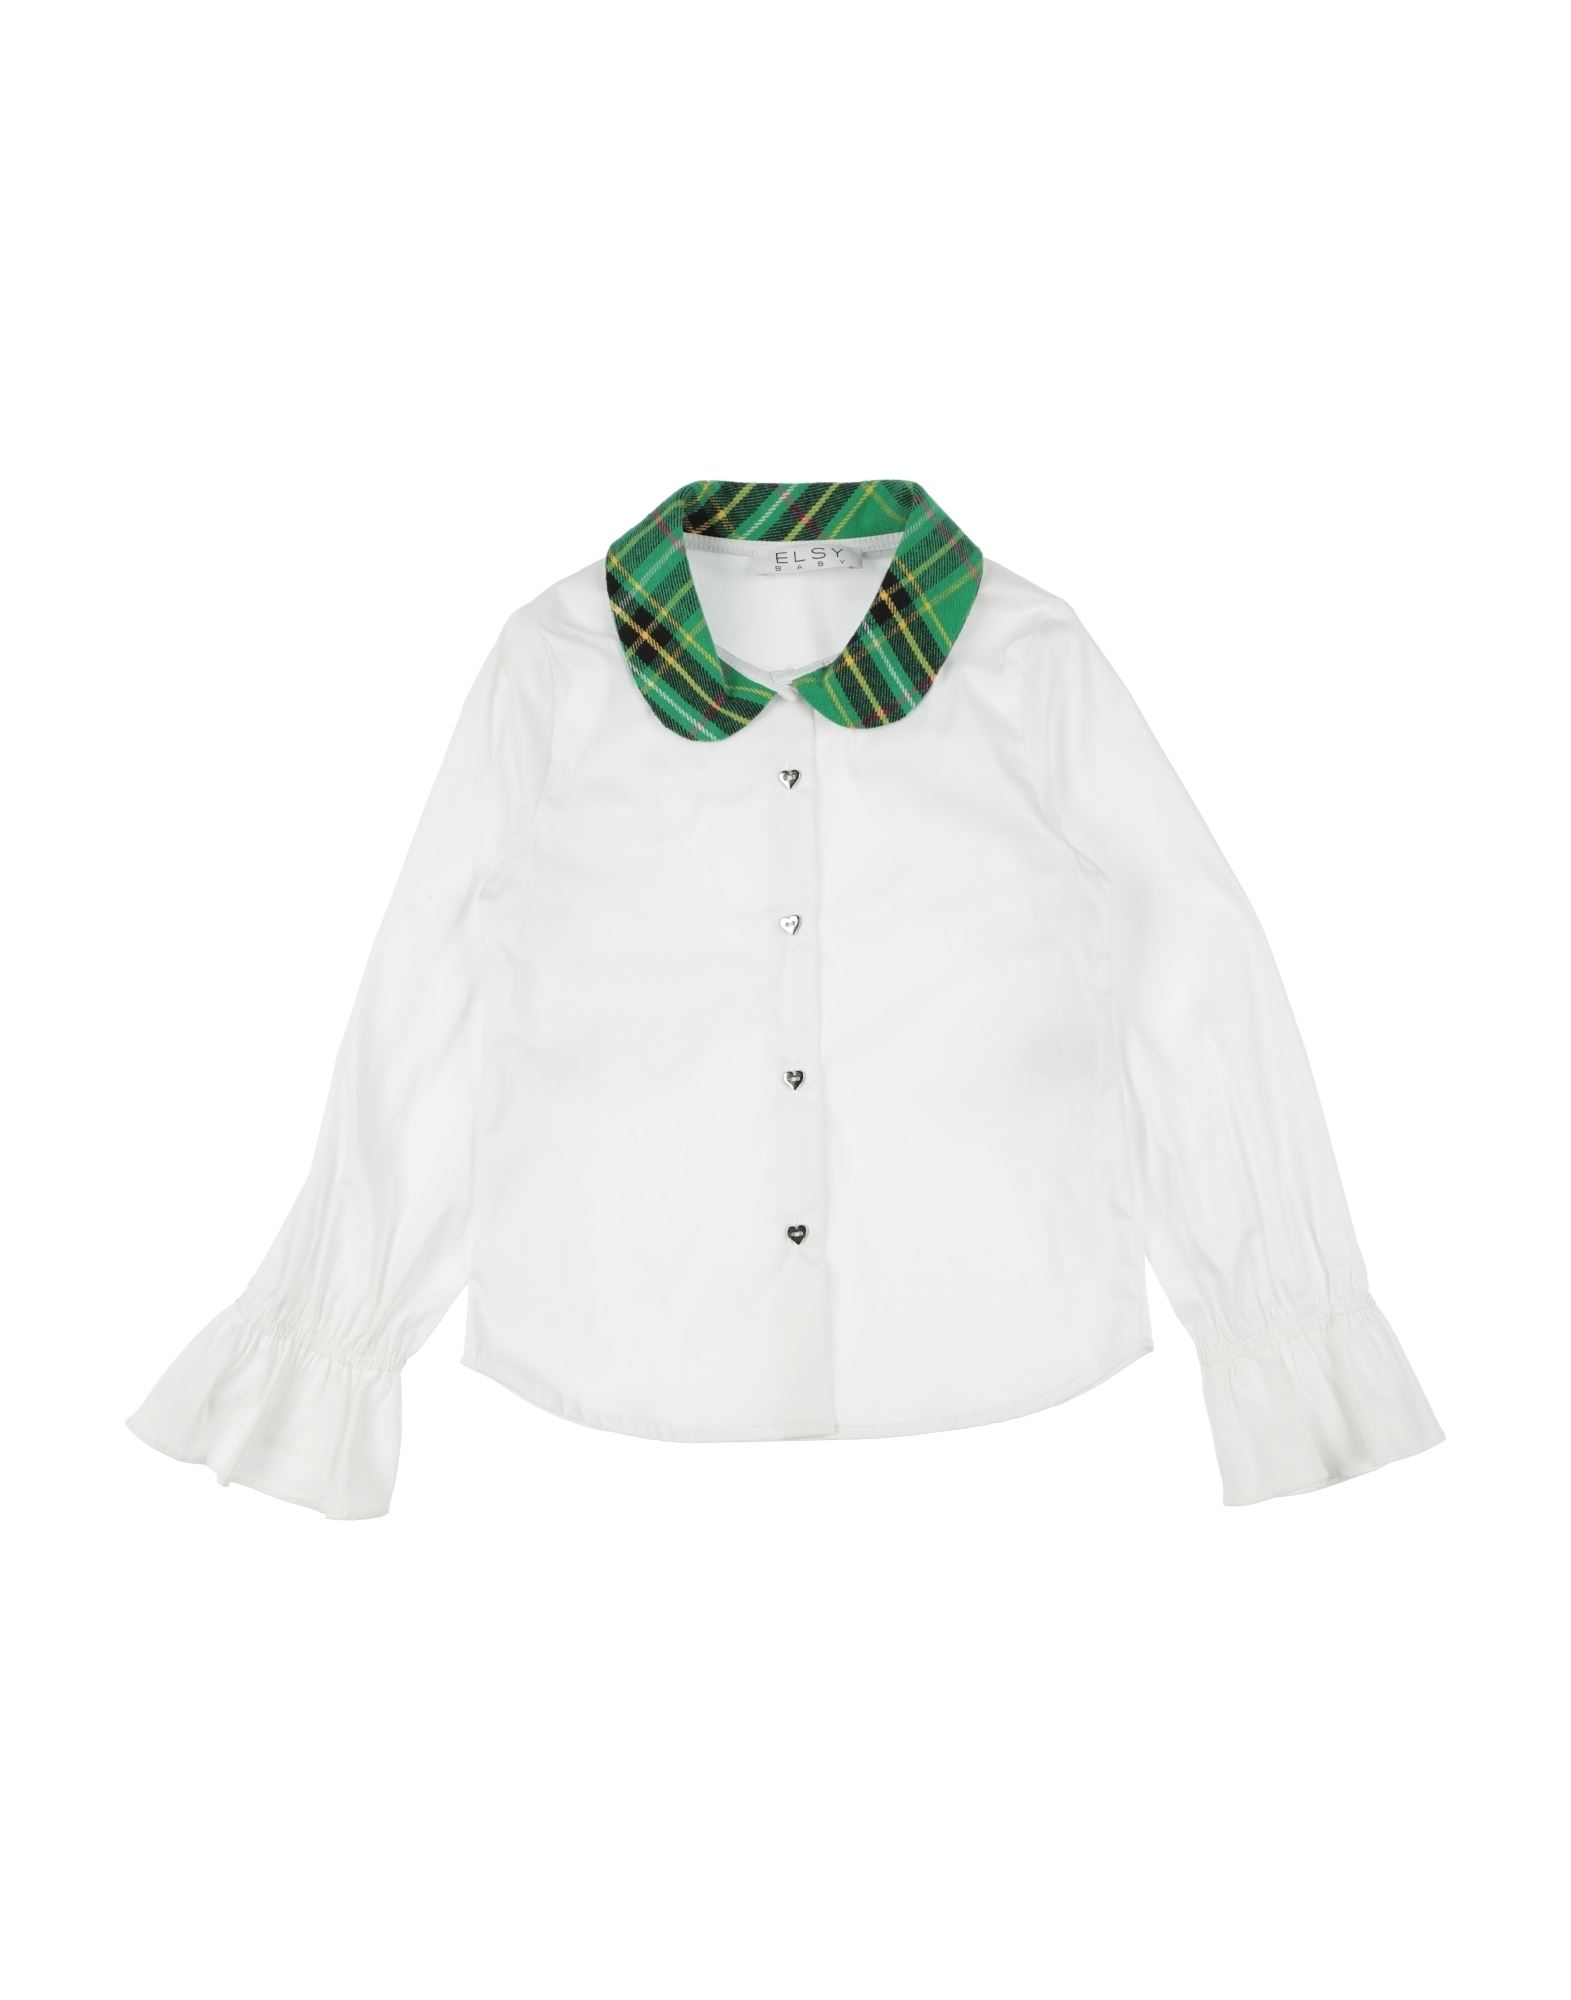 Elsy Kids'  Shirts In White